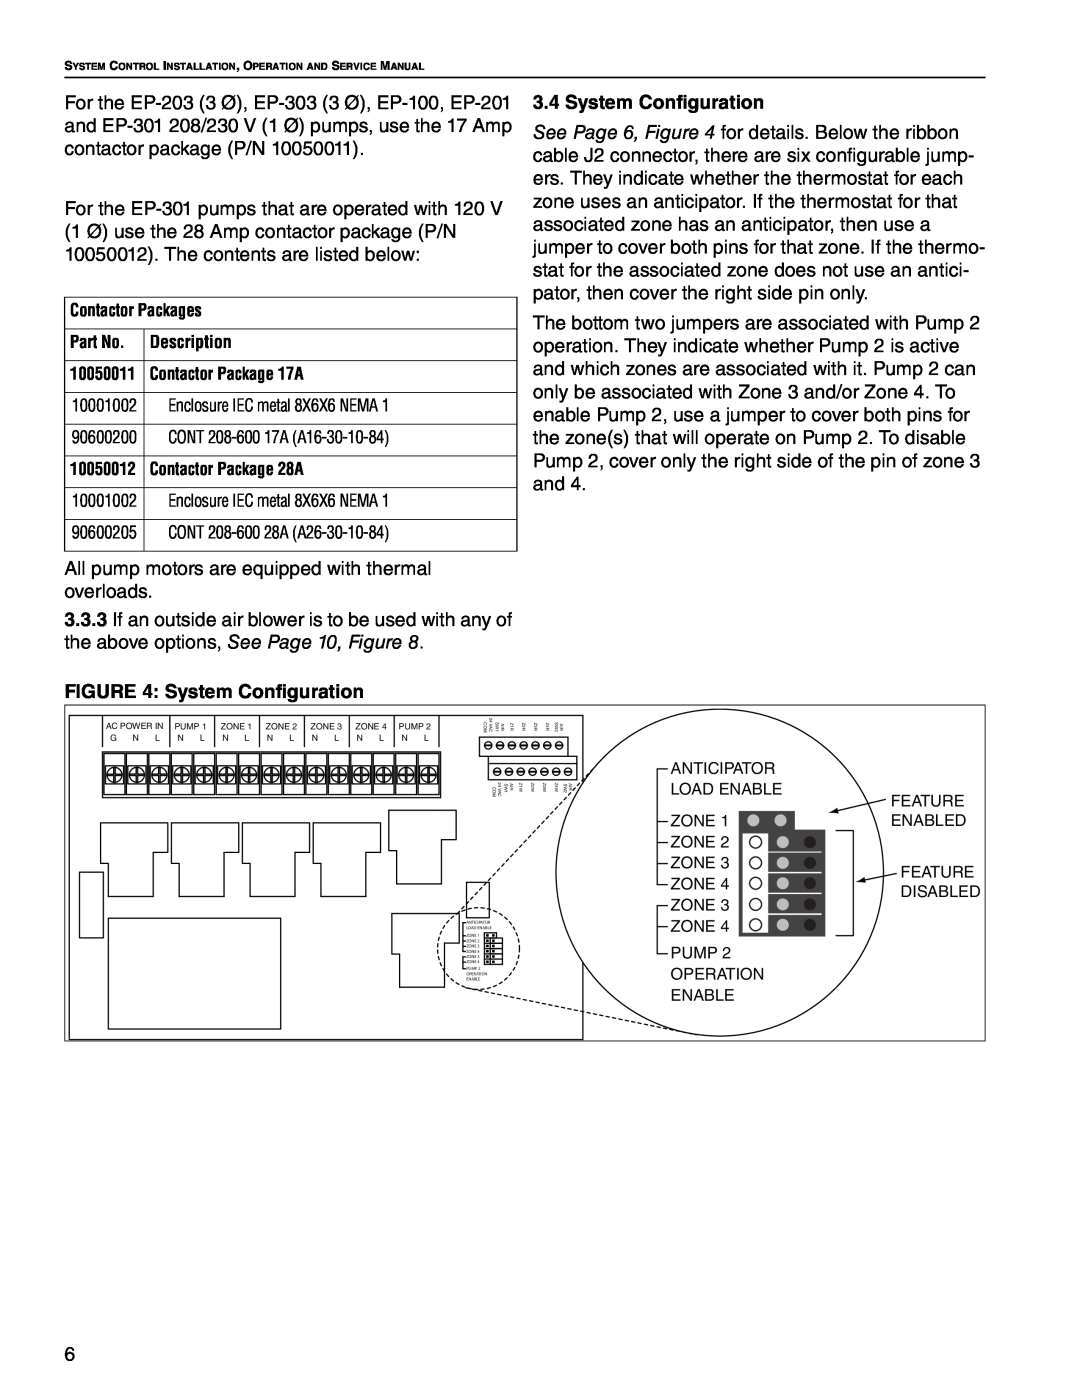 Roberts Gorden HP 208 V 1, HP 208 V 3, HP 230 V 1, HP 460 V 3, HP 230 V 3, HP 120 V 1 service manual System Configuration 